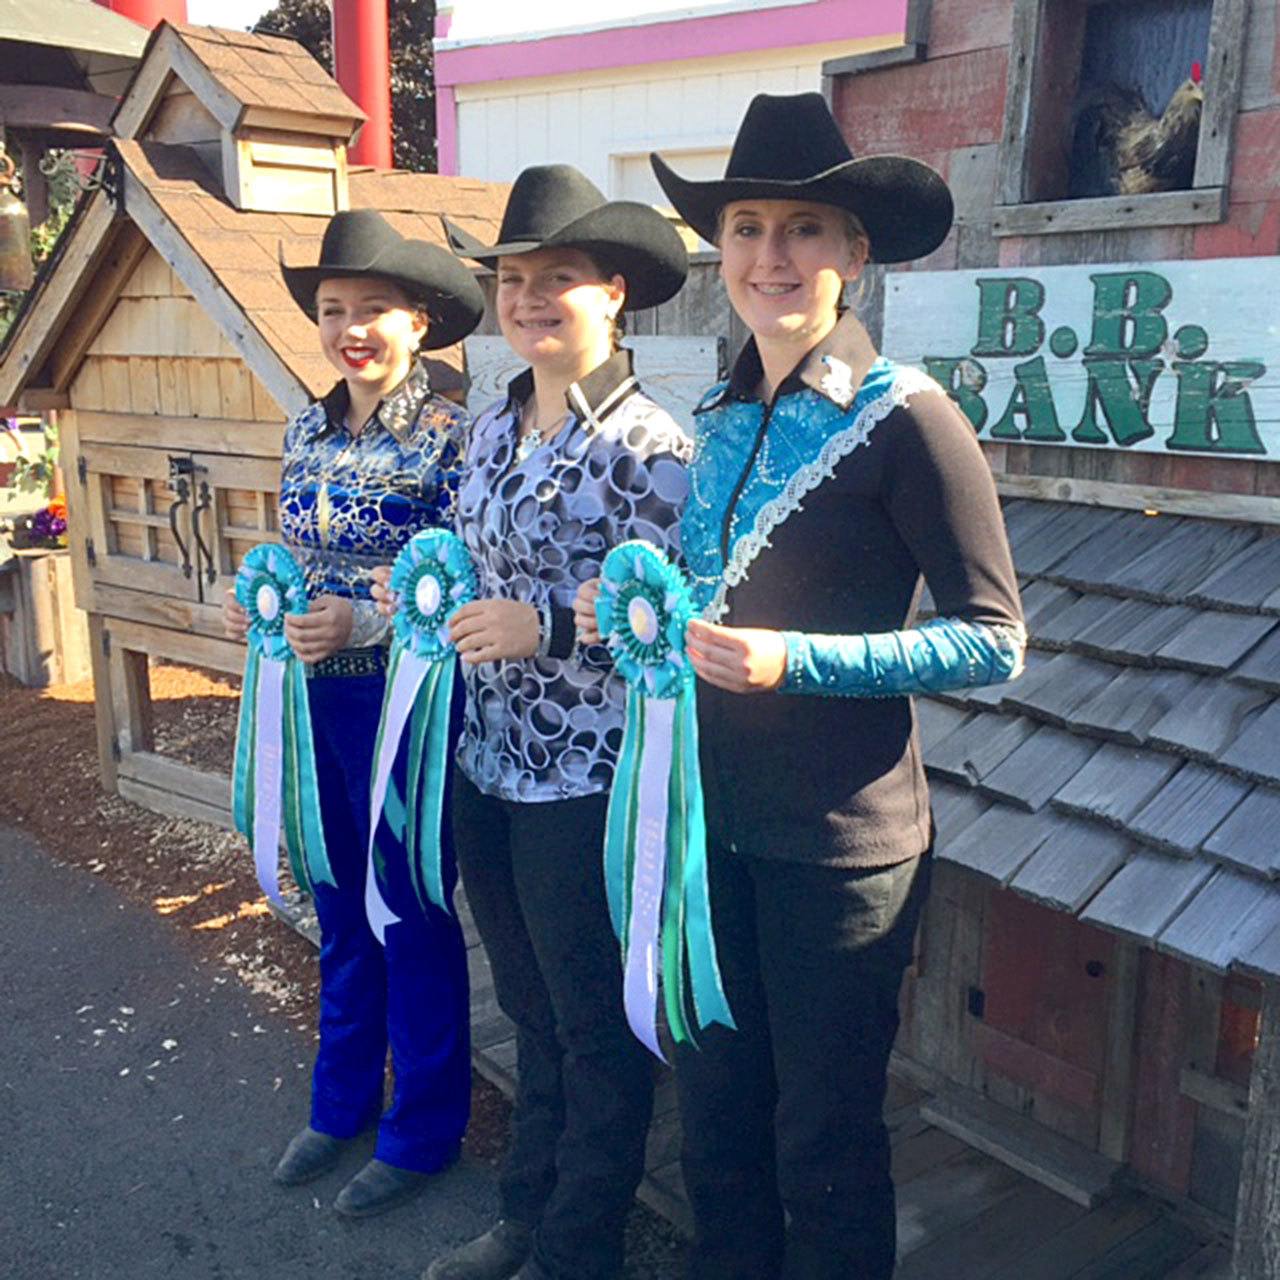 Russelle Graf Clallam County 4-H Senior Division riders who competed at the Washington State Fair in Puyallup, from left, Emily Menchew, Madison Green and Kaylie Graf.